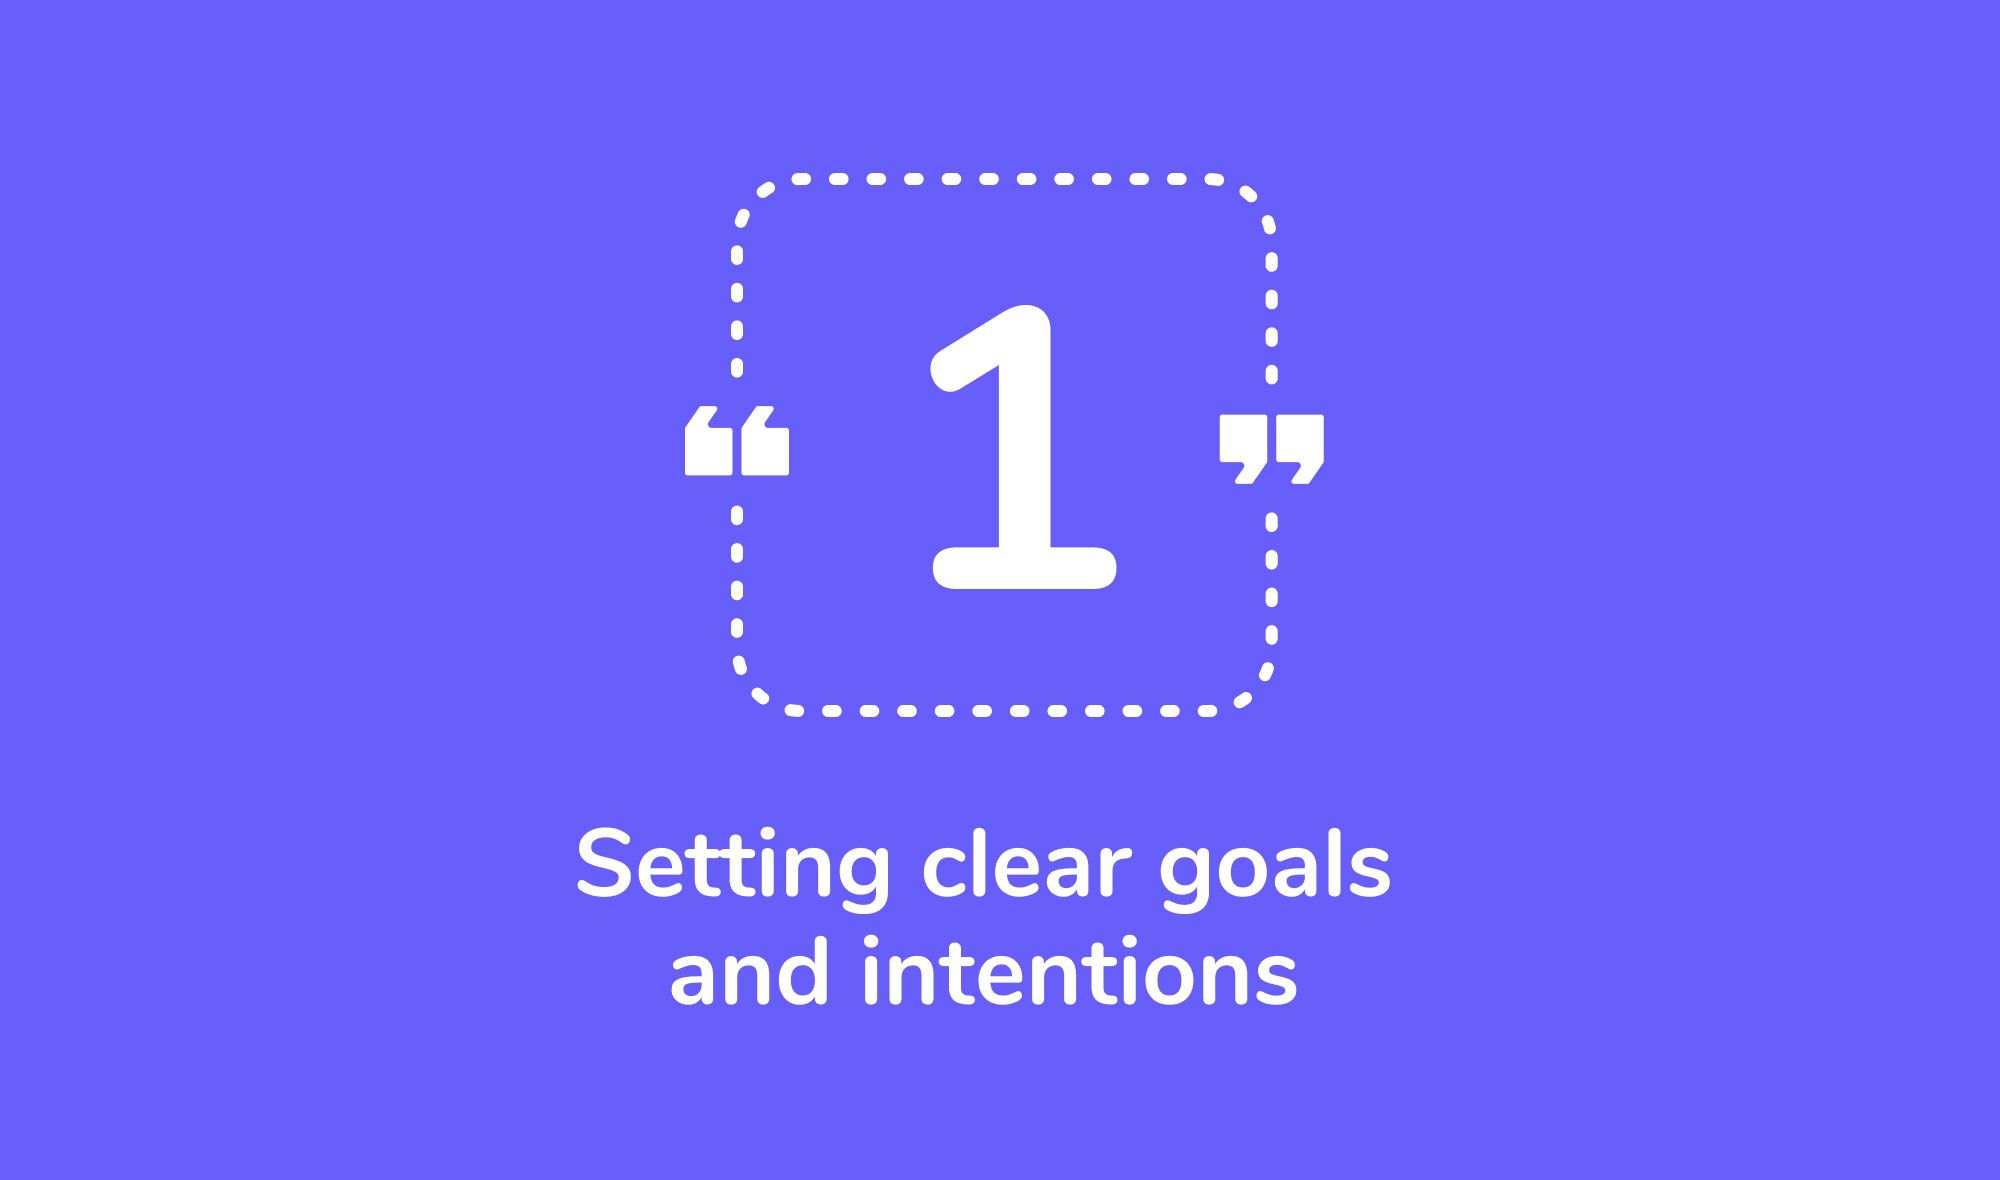 Flow state training - Setting clear goals and intentions